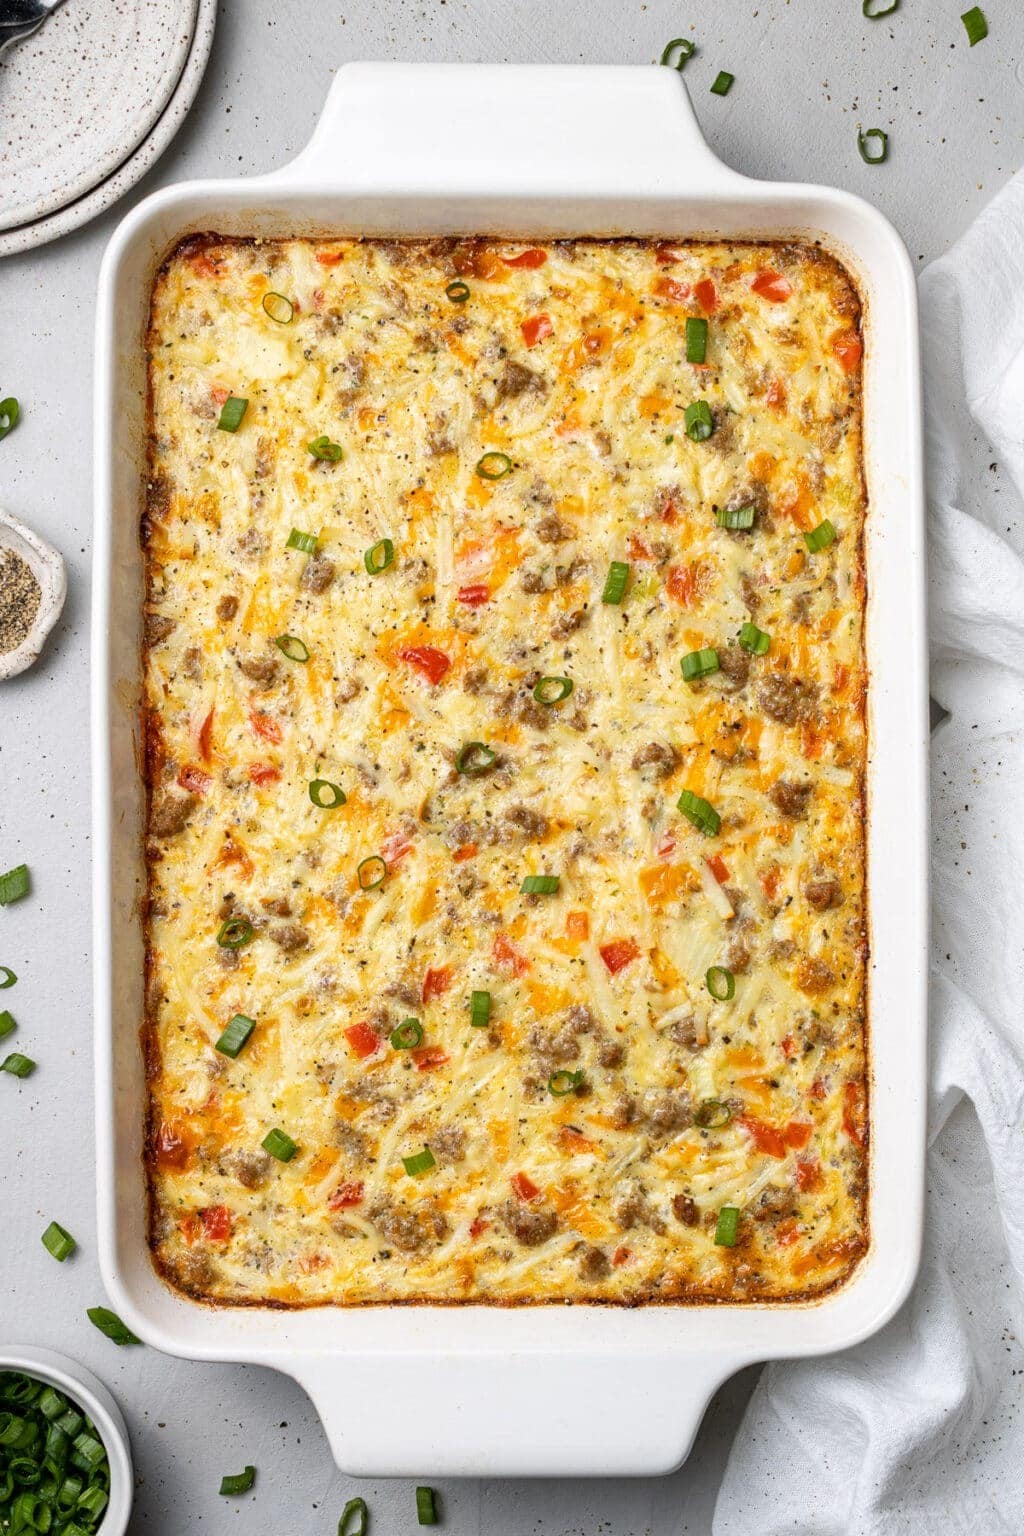 Egg Casserole With Hash Browns, breakfast sausage, dried parsley, dried basil, pepper, onions, bell peppers and cheddar cheese